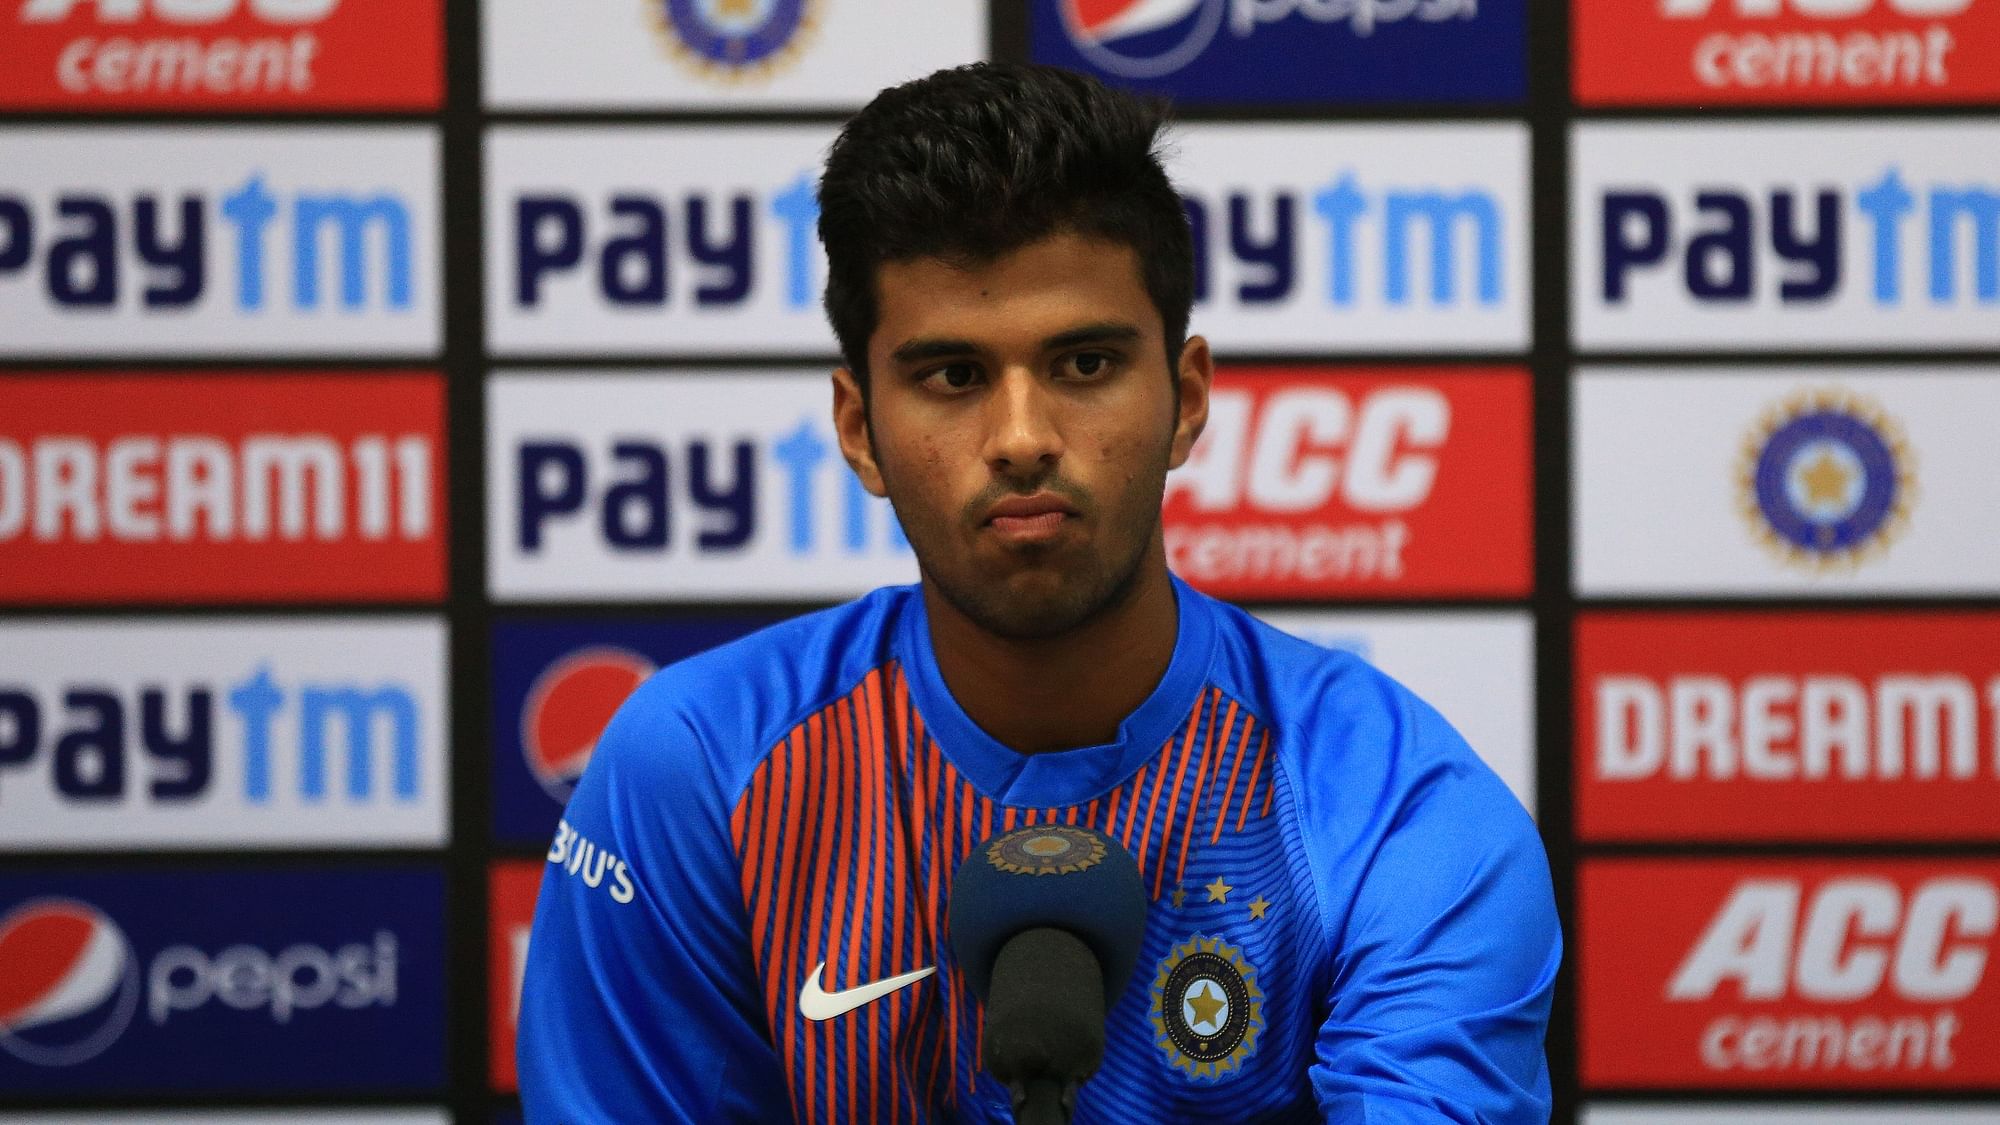 Washington Sundar’s first Test wicket was that of Steve Smith at the Gabba.&nbsp;